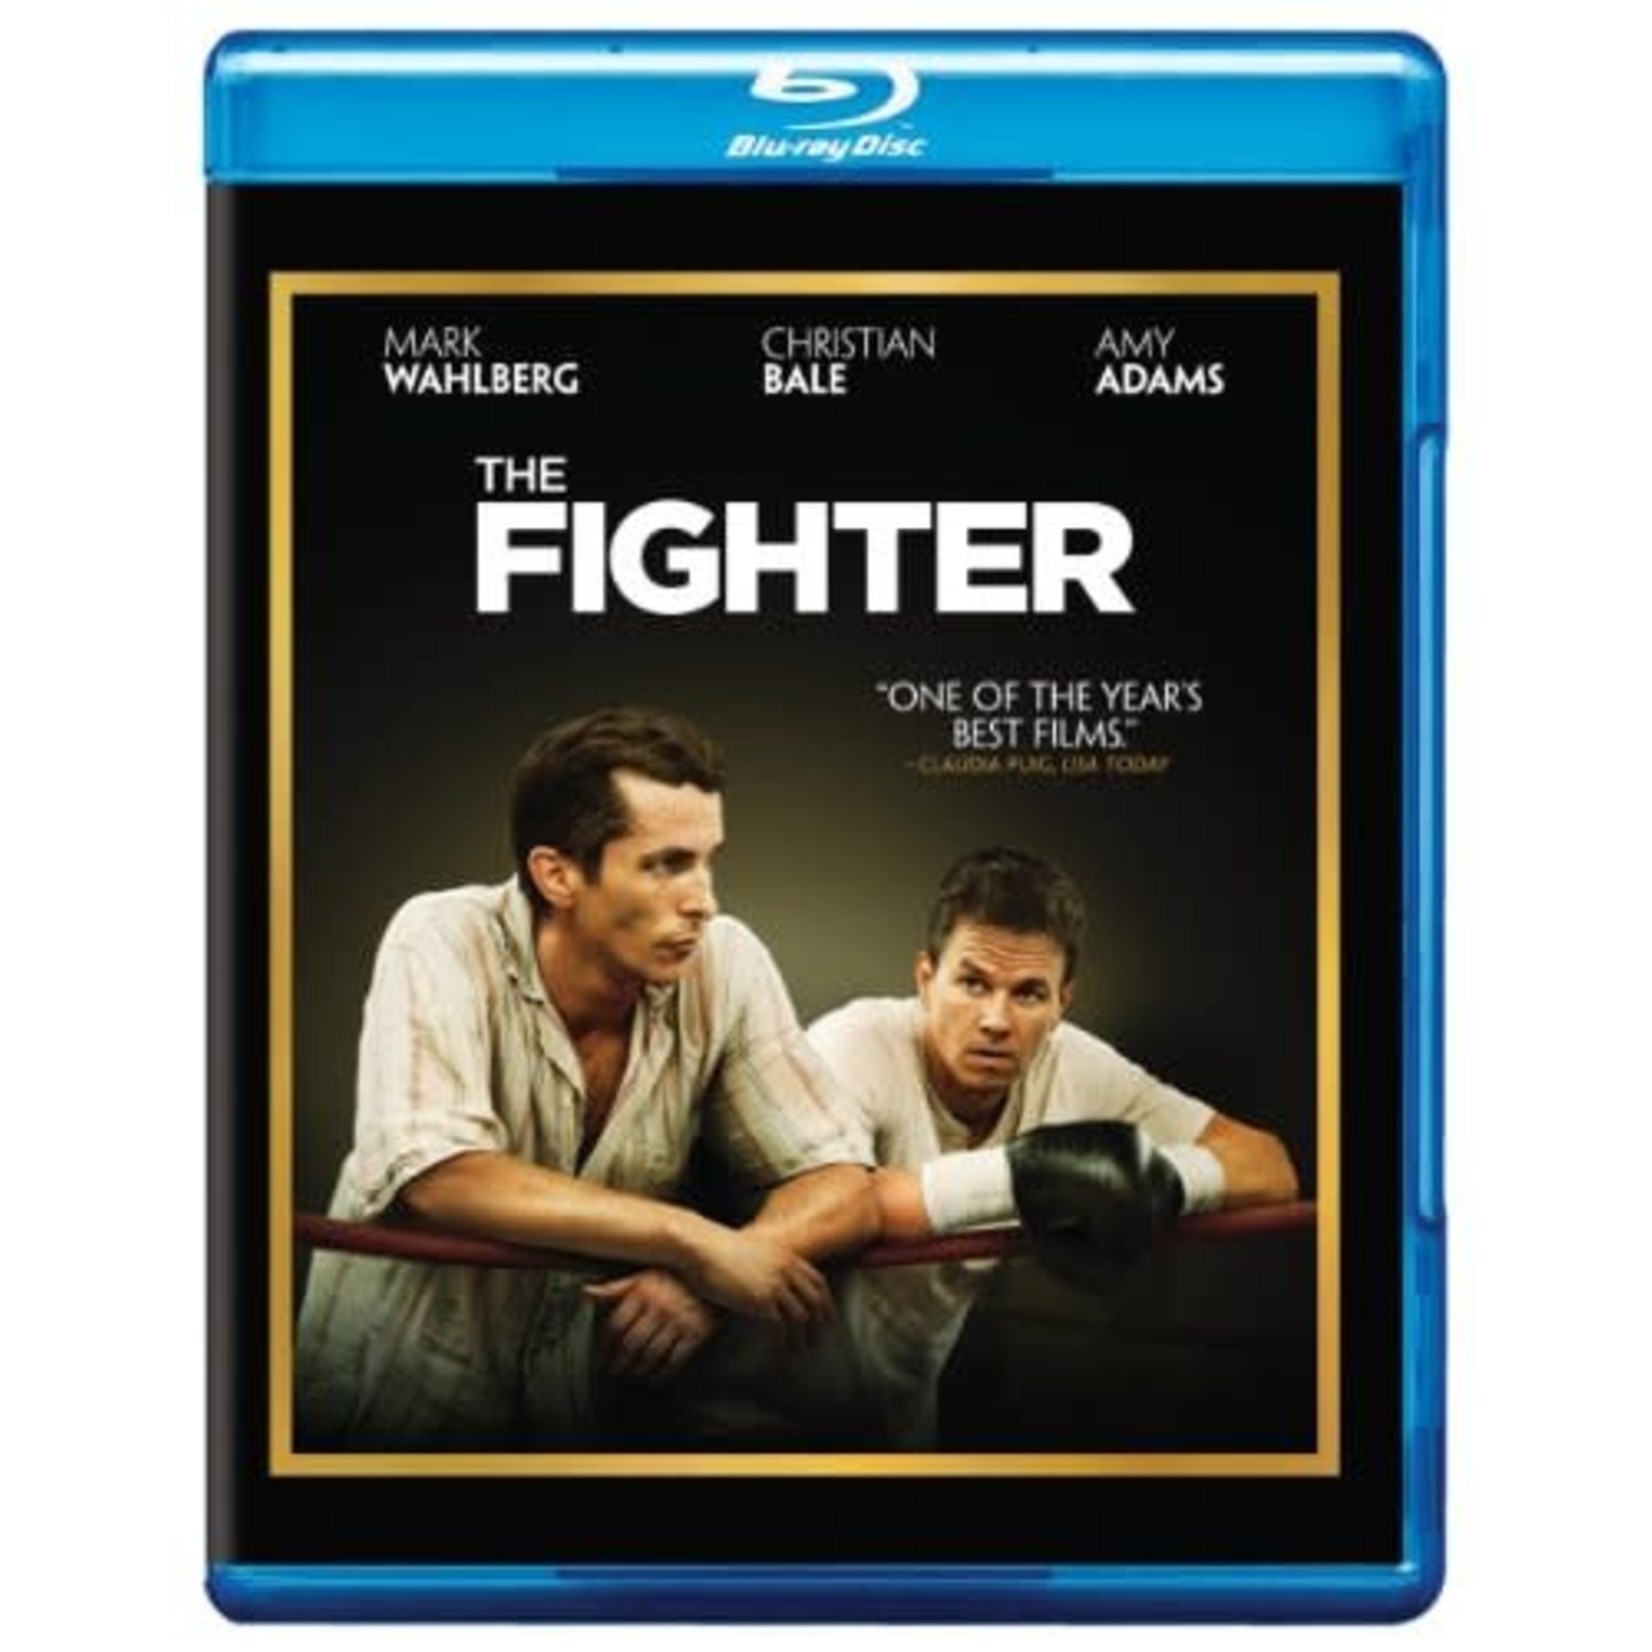 Fighter (2010) [USED BRD]